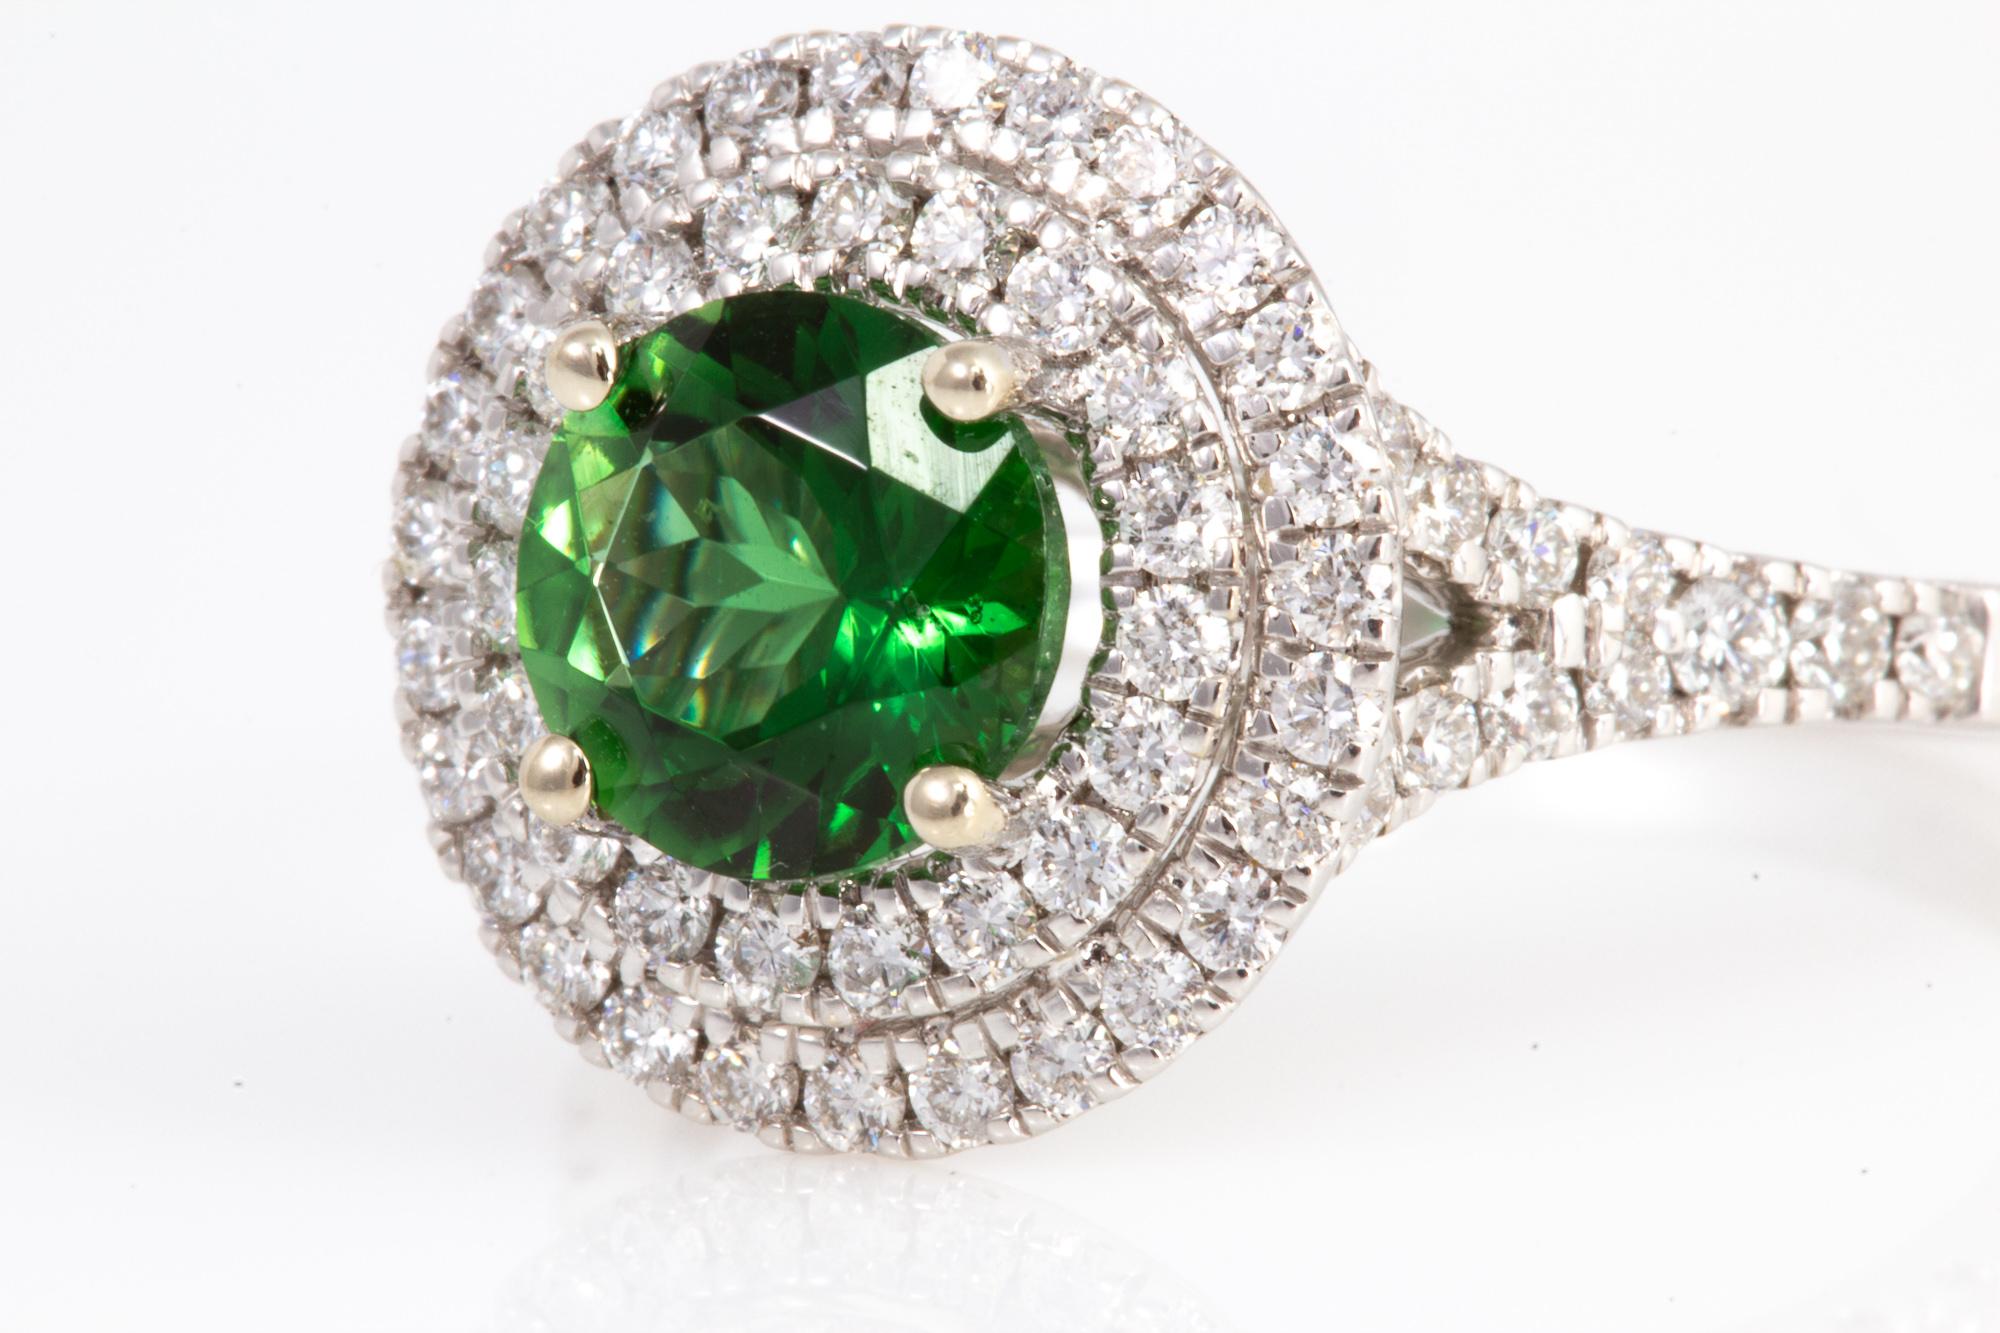 Exceptionally Well Cut 1.26 Carat Chrome Tourmaline and Diamond Ring 5